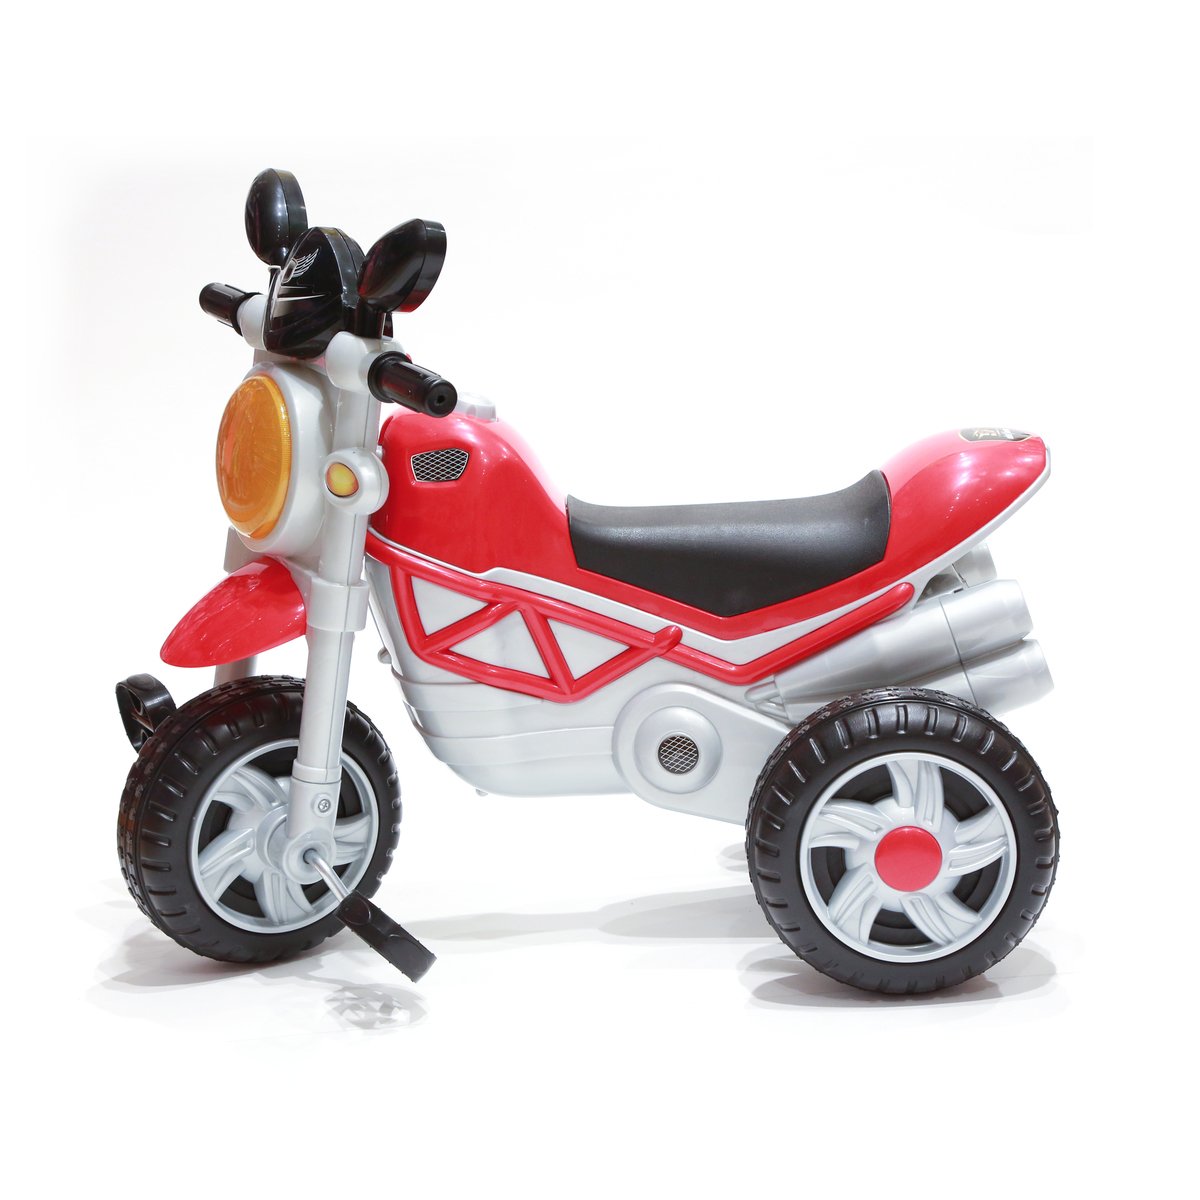 Skid Fusion Tricycle 221 Assorted Colors